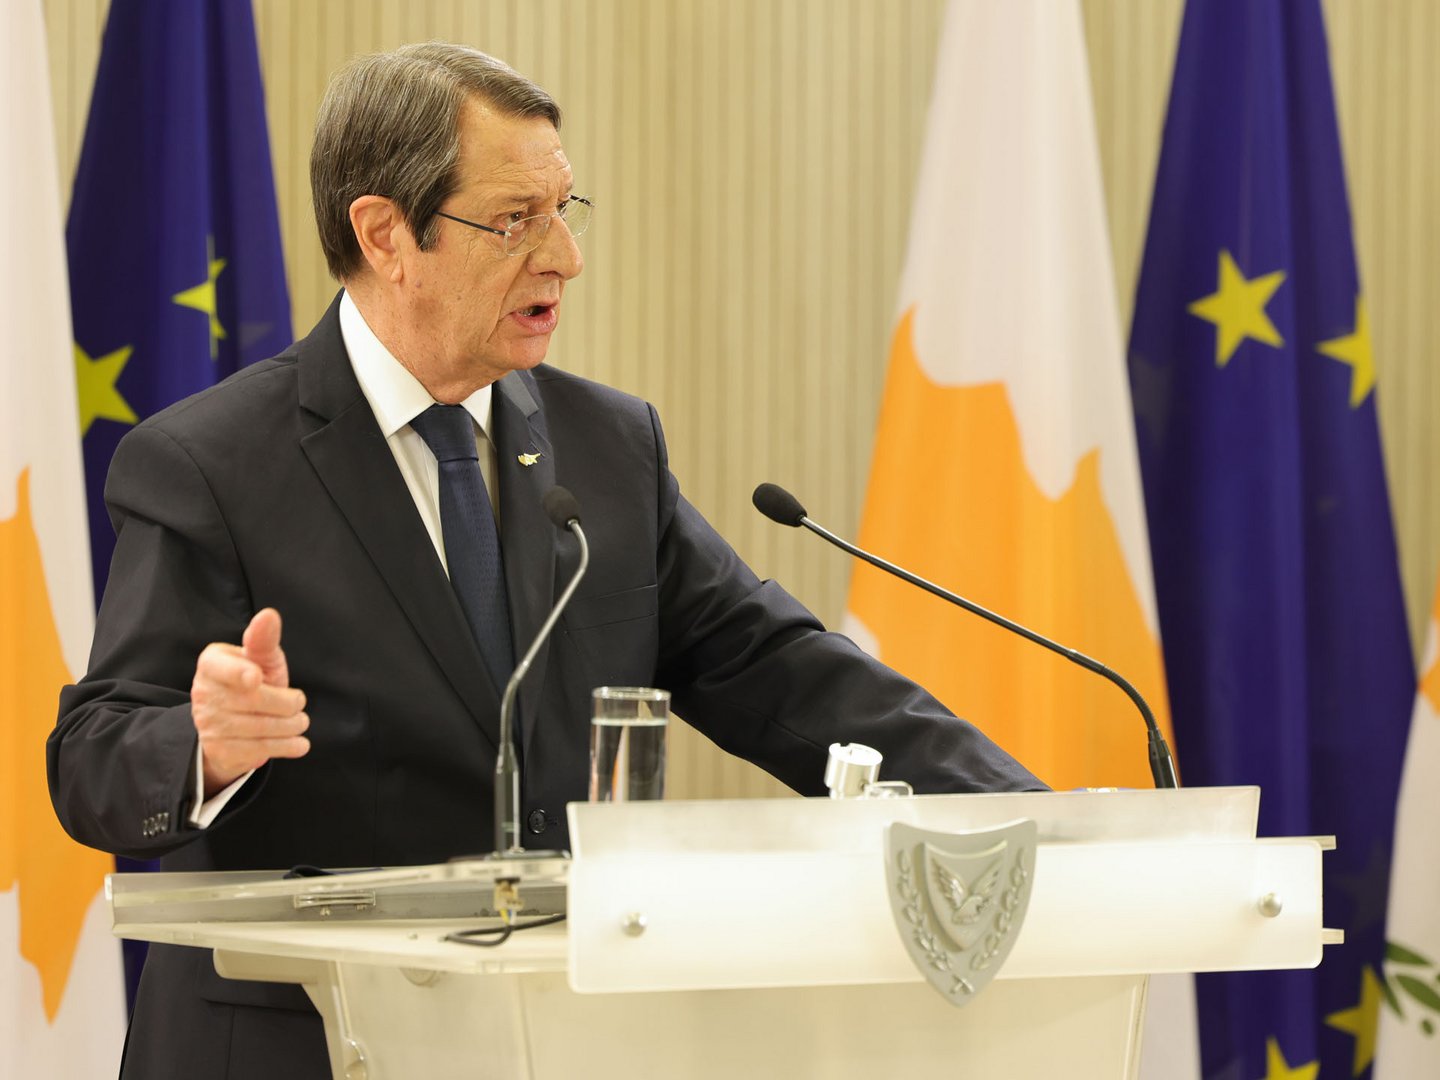 image Our View: There is plenty to criticize the Anastasiades government for &#8211; but not the economy